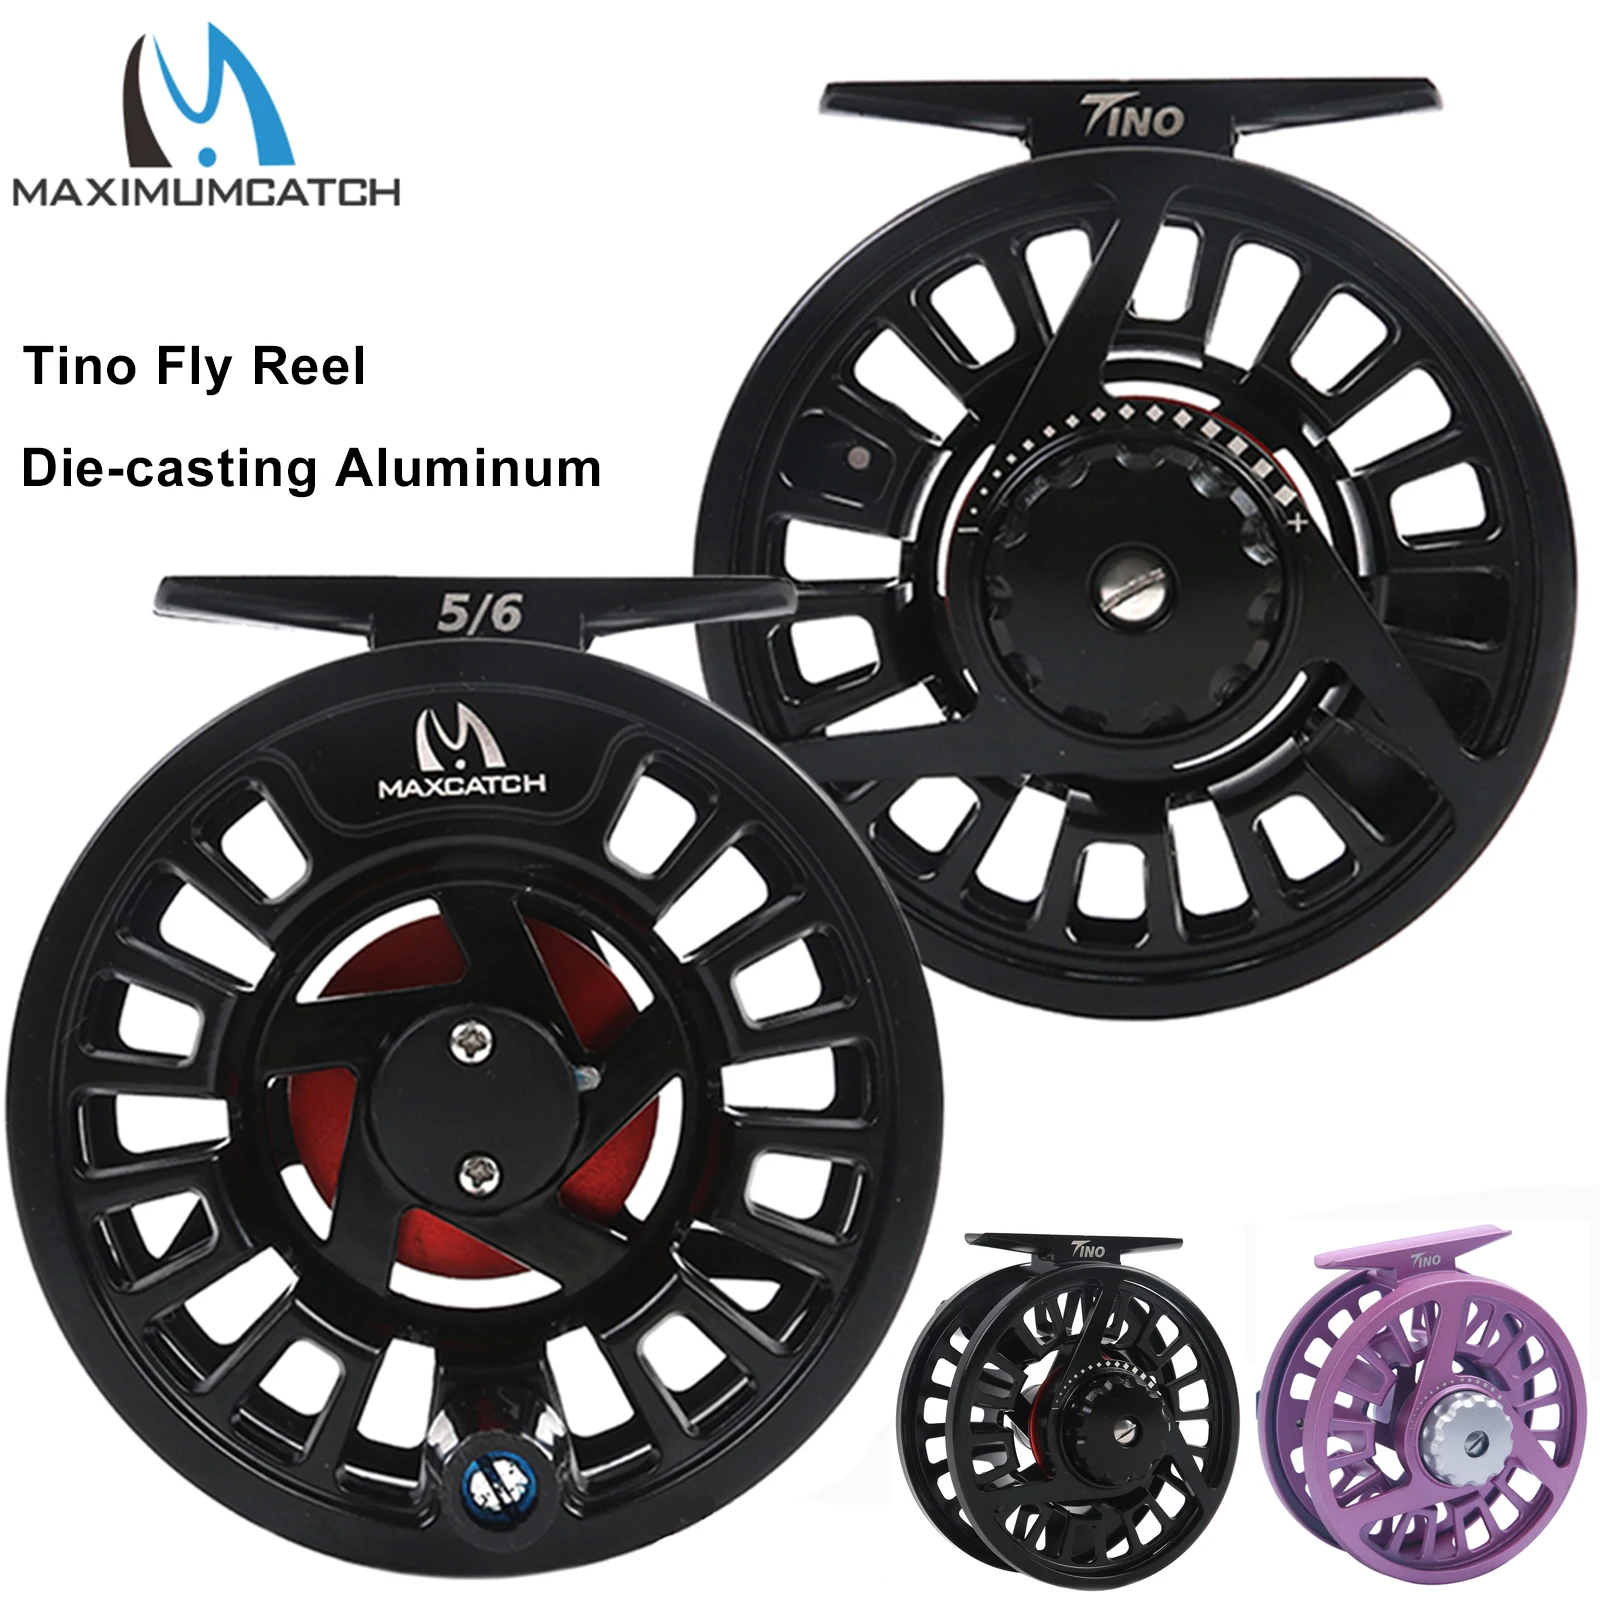 Maximumcatch Maxcatch Die-casting Aluminum Fly Fishing Reel Right and Left  Handed 3-8wt Black Color Fly Reel - AliExpress